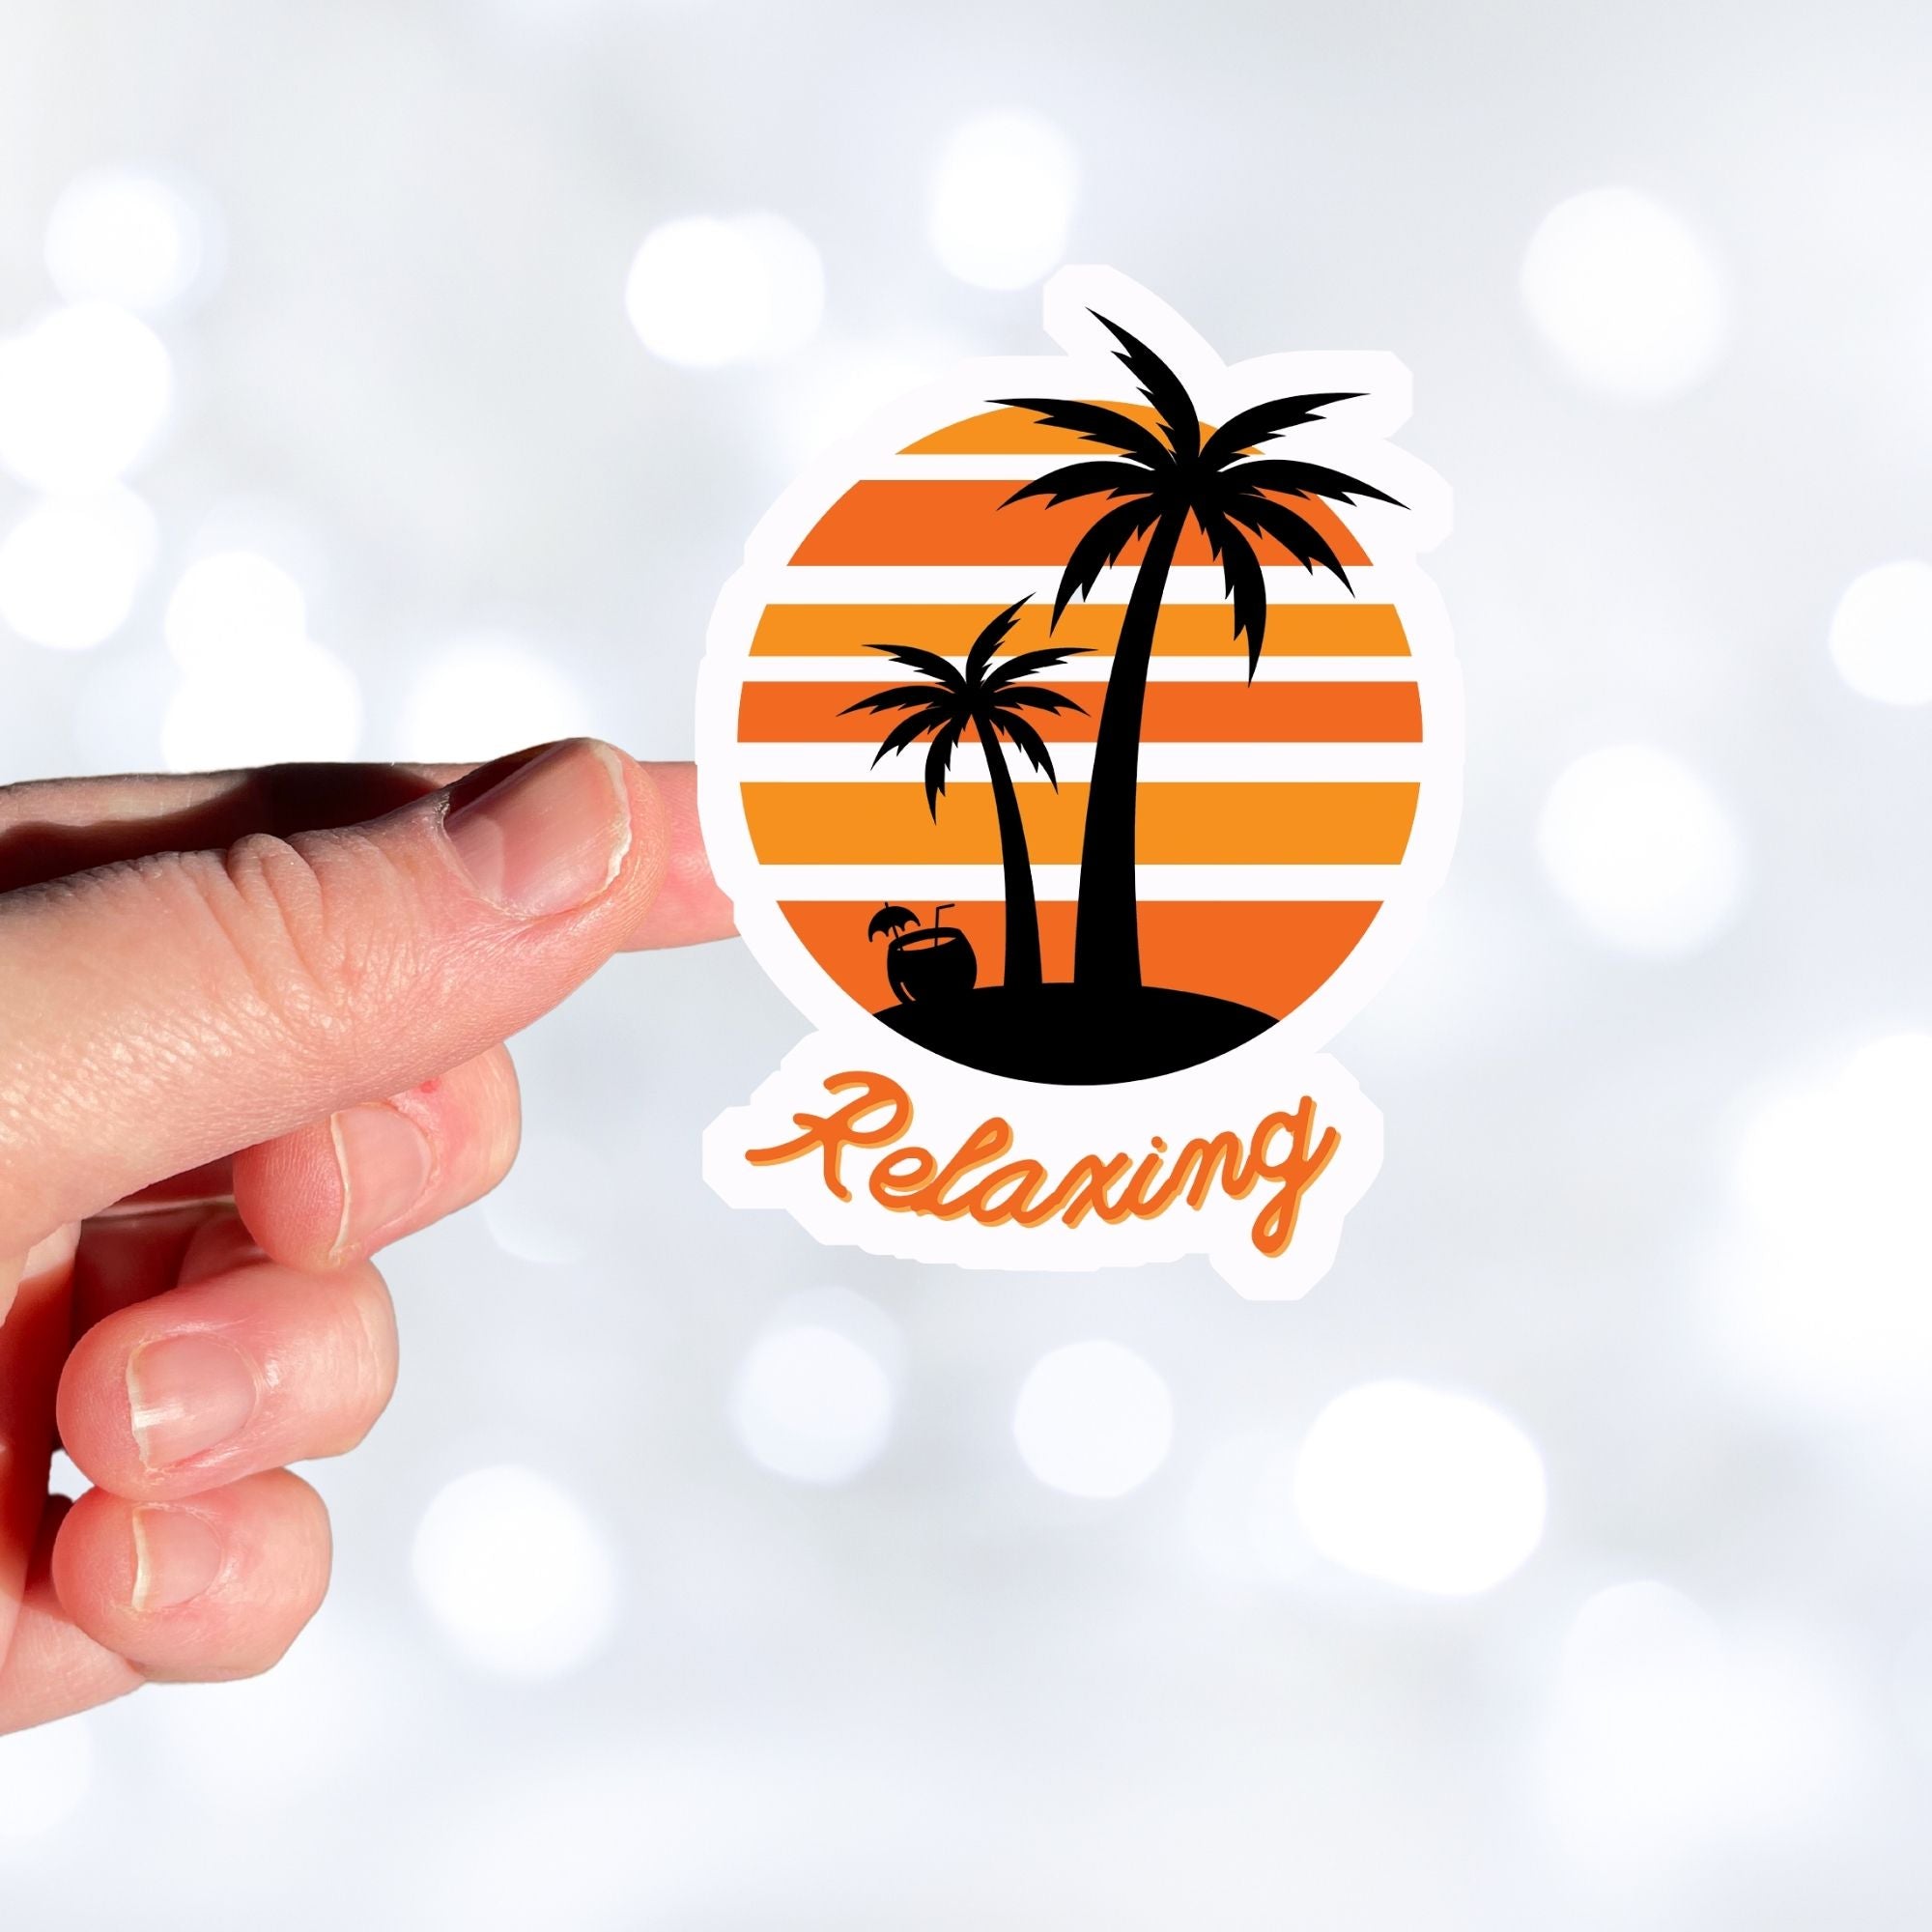 Grab your favorite beverage and relax under the palm trees! This individual die-cut sticker features two palm trees and an umbrella drink in a coconut shell, on an orange and white gradient background, with the word "Relaxing" below. This image shows a hand holding the relaxing sticker.